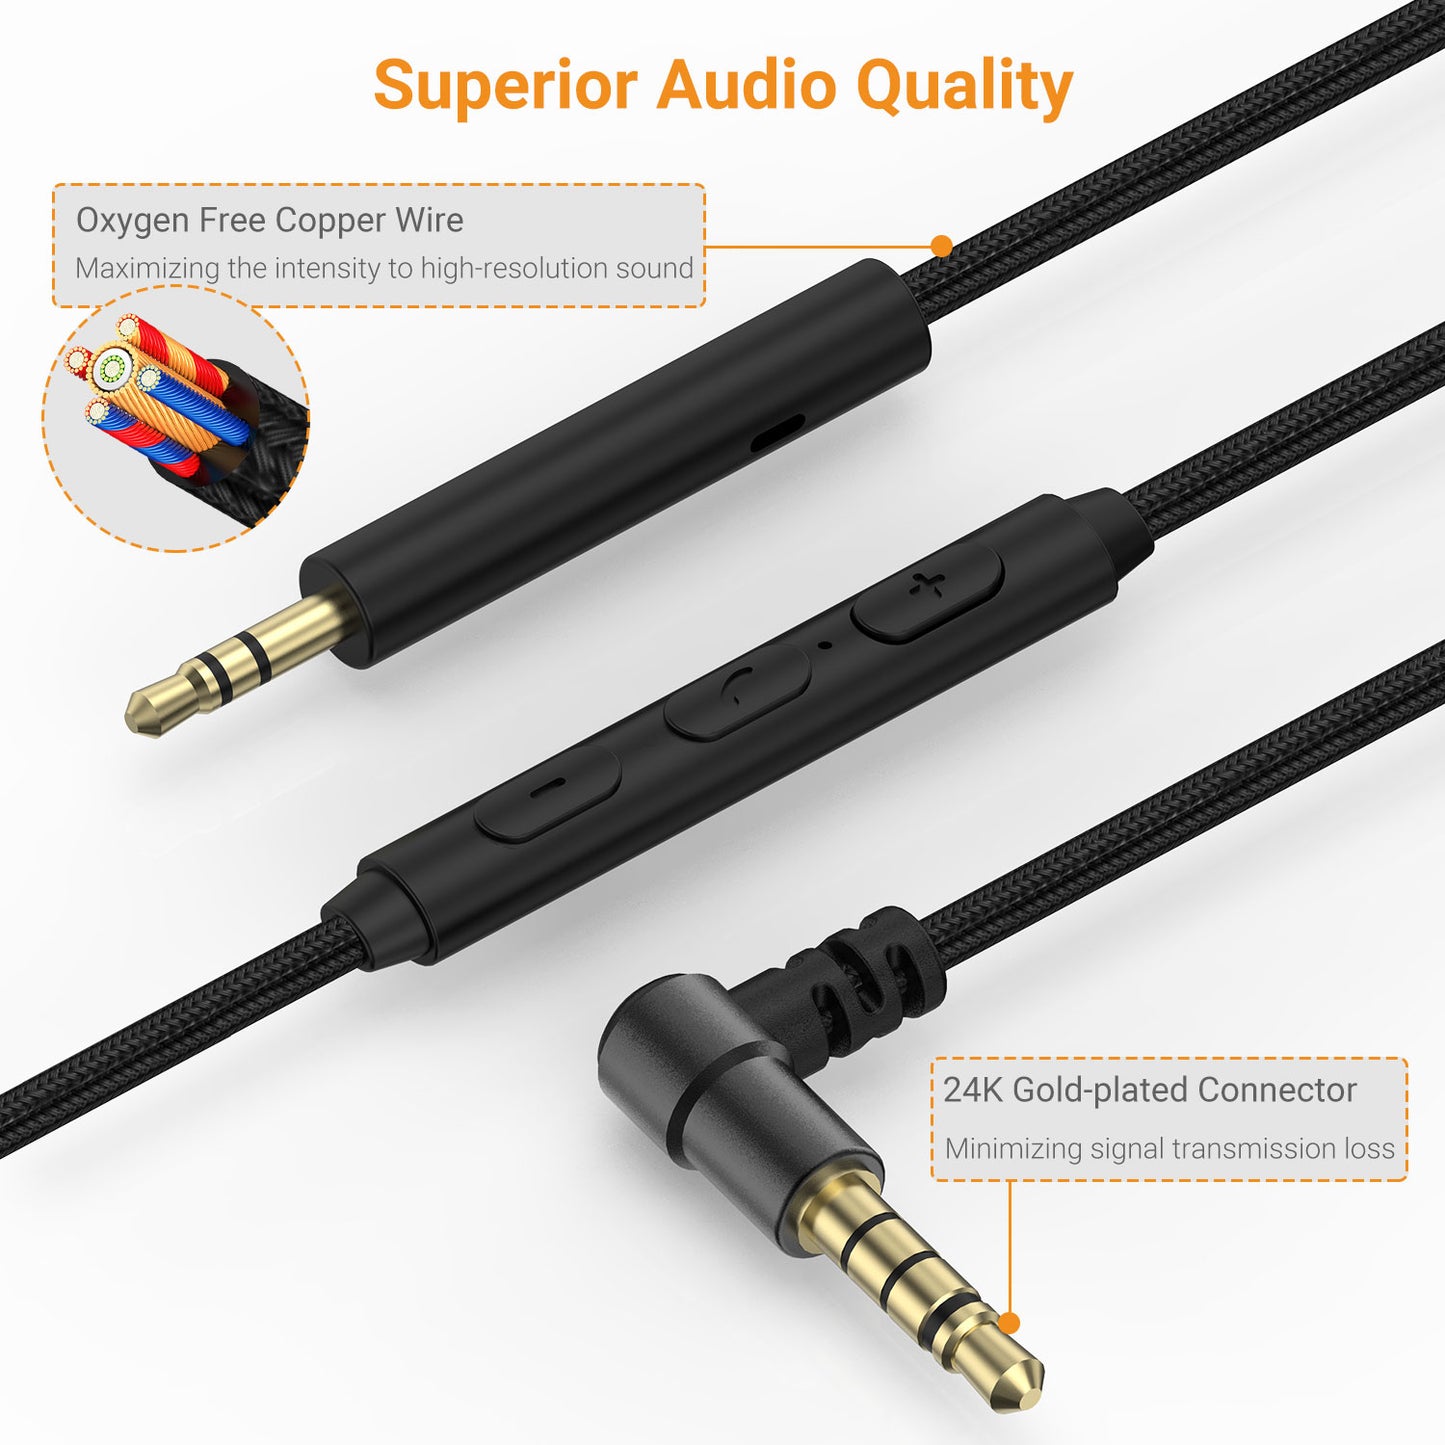 3.5mm to 2.5mm Braided Headphone Cable-Black 4FT